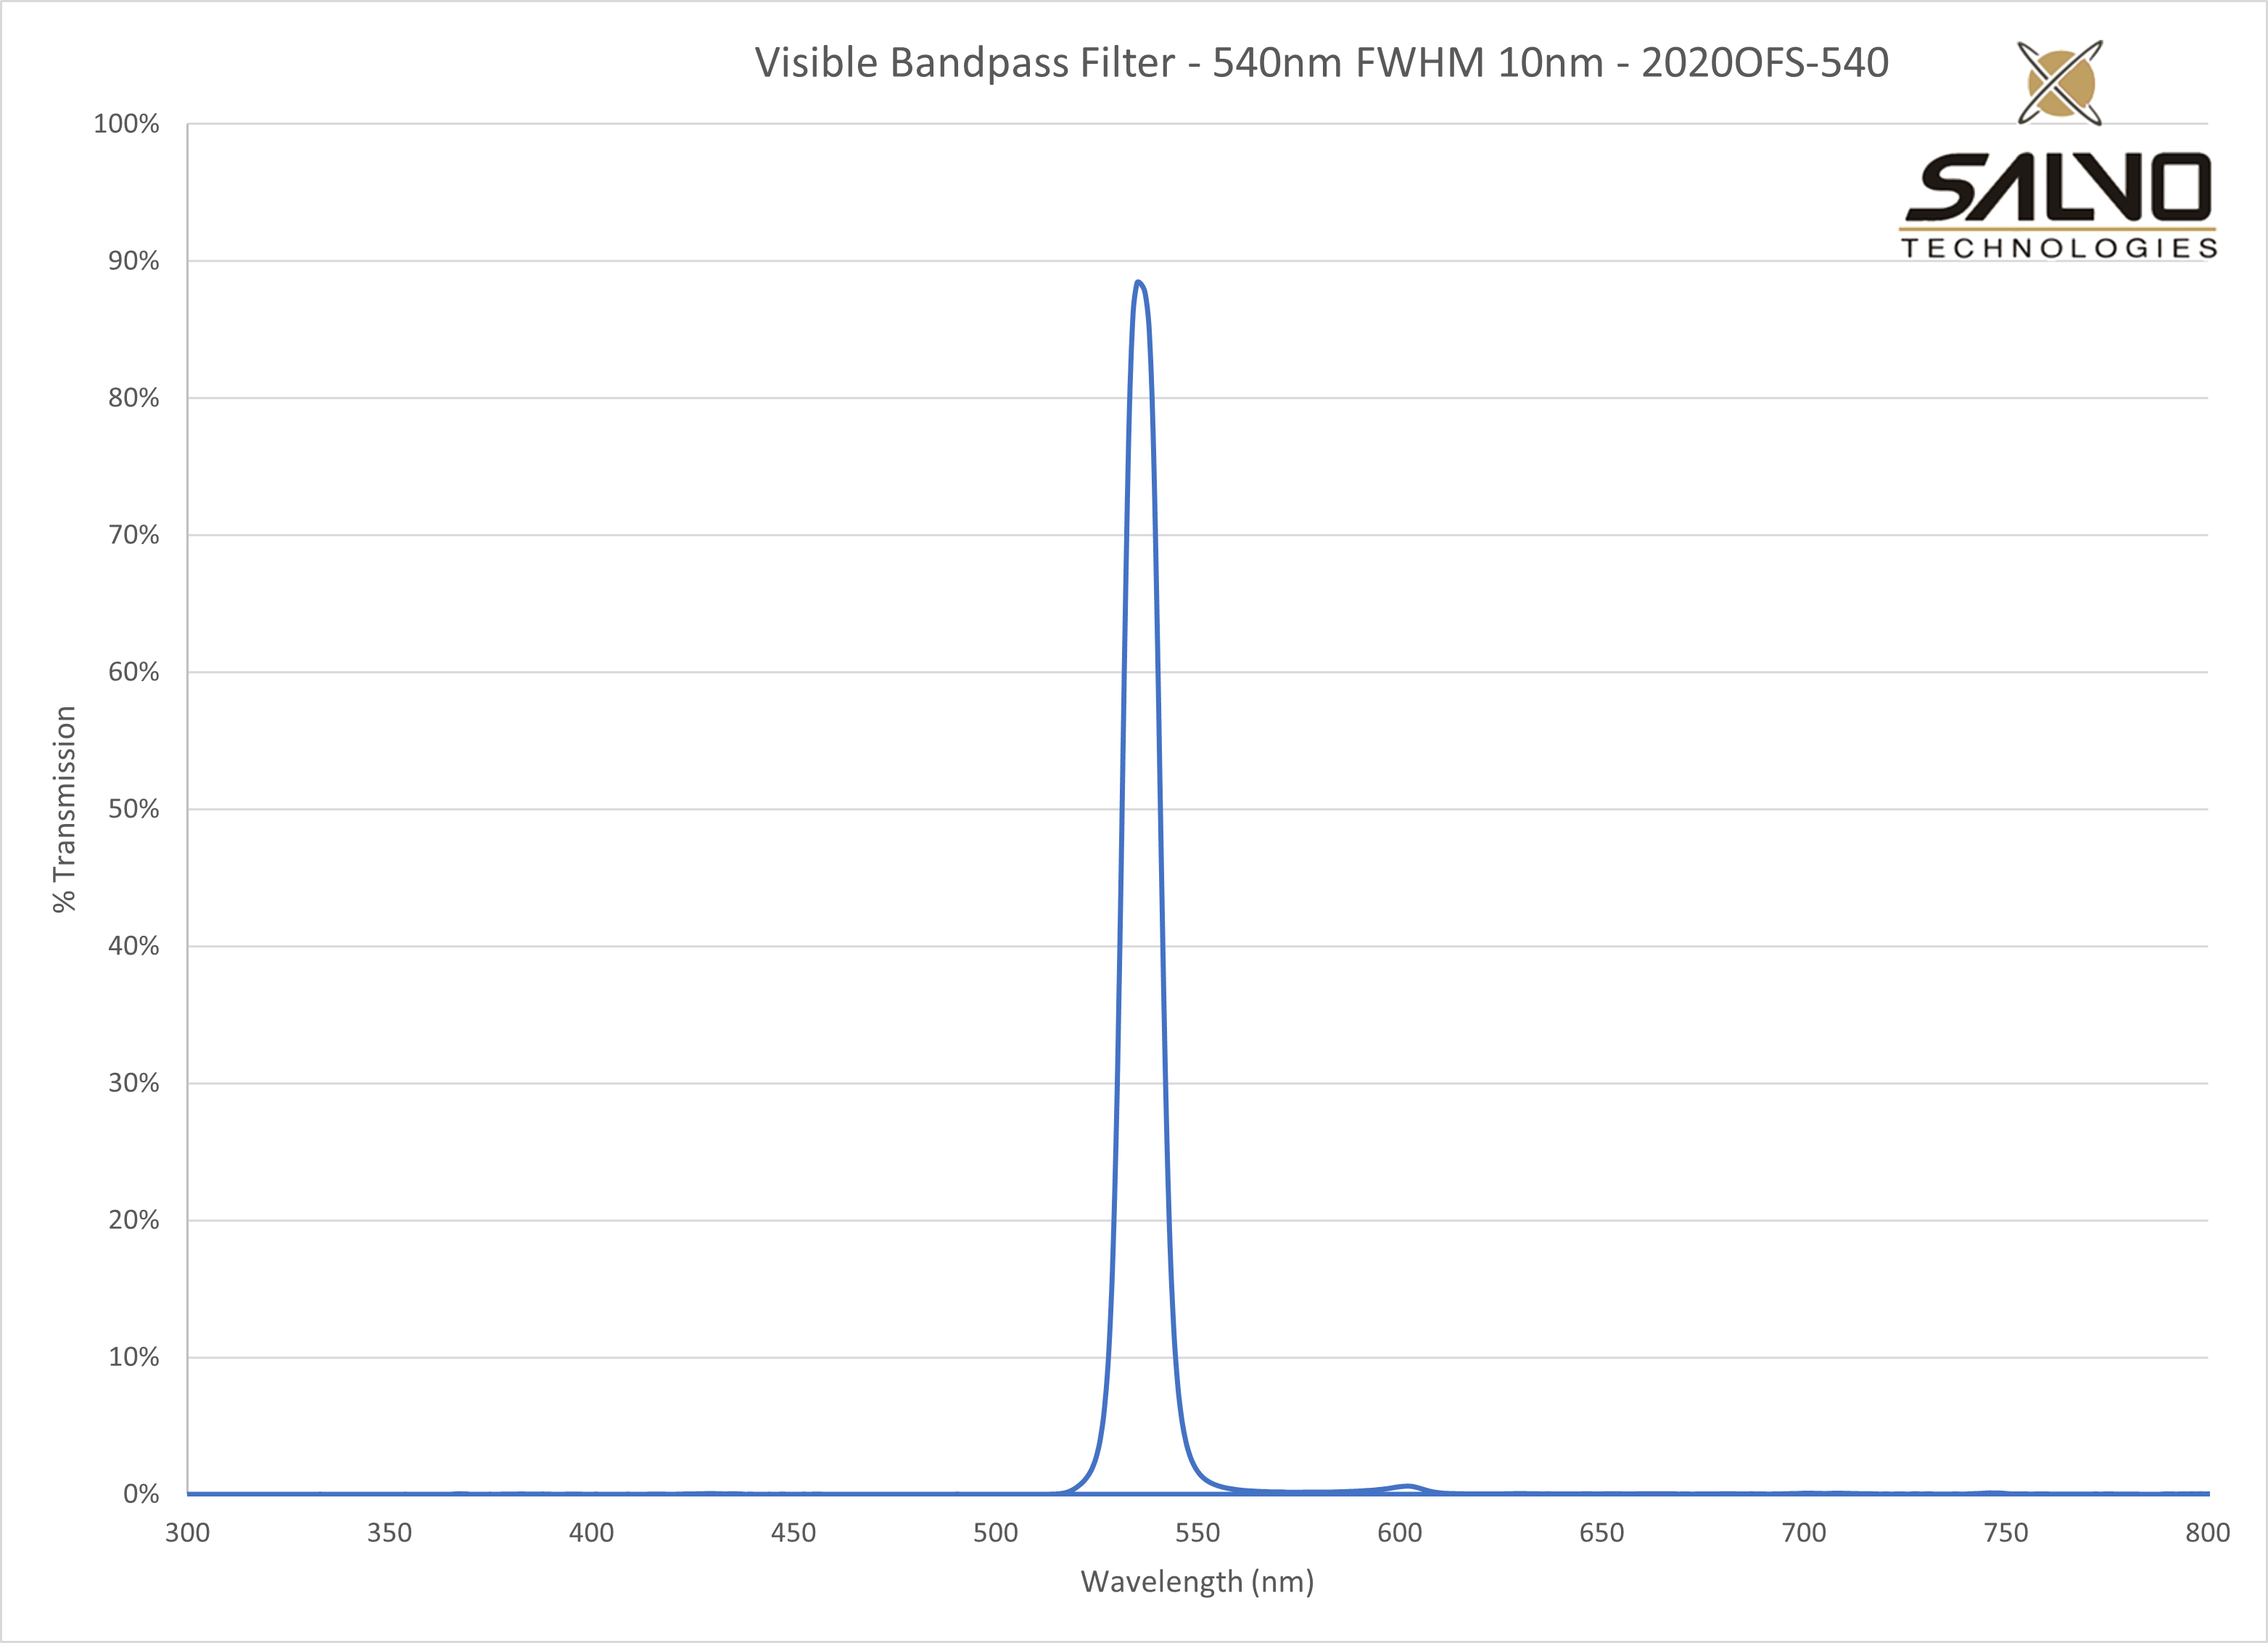 Visible Bandpass Filter - 540nm FWHM 10nm - 2020OFS-540